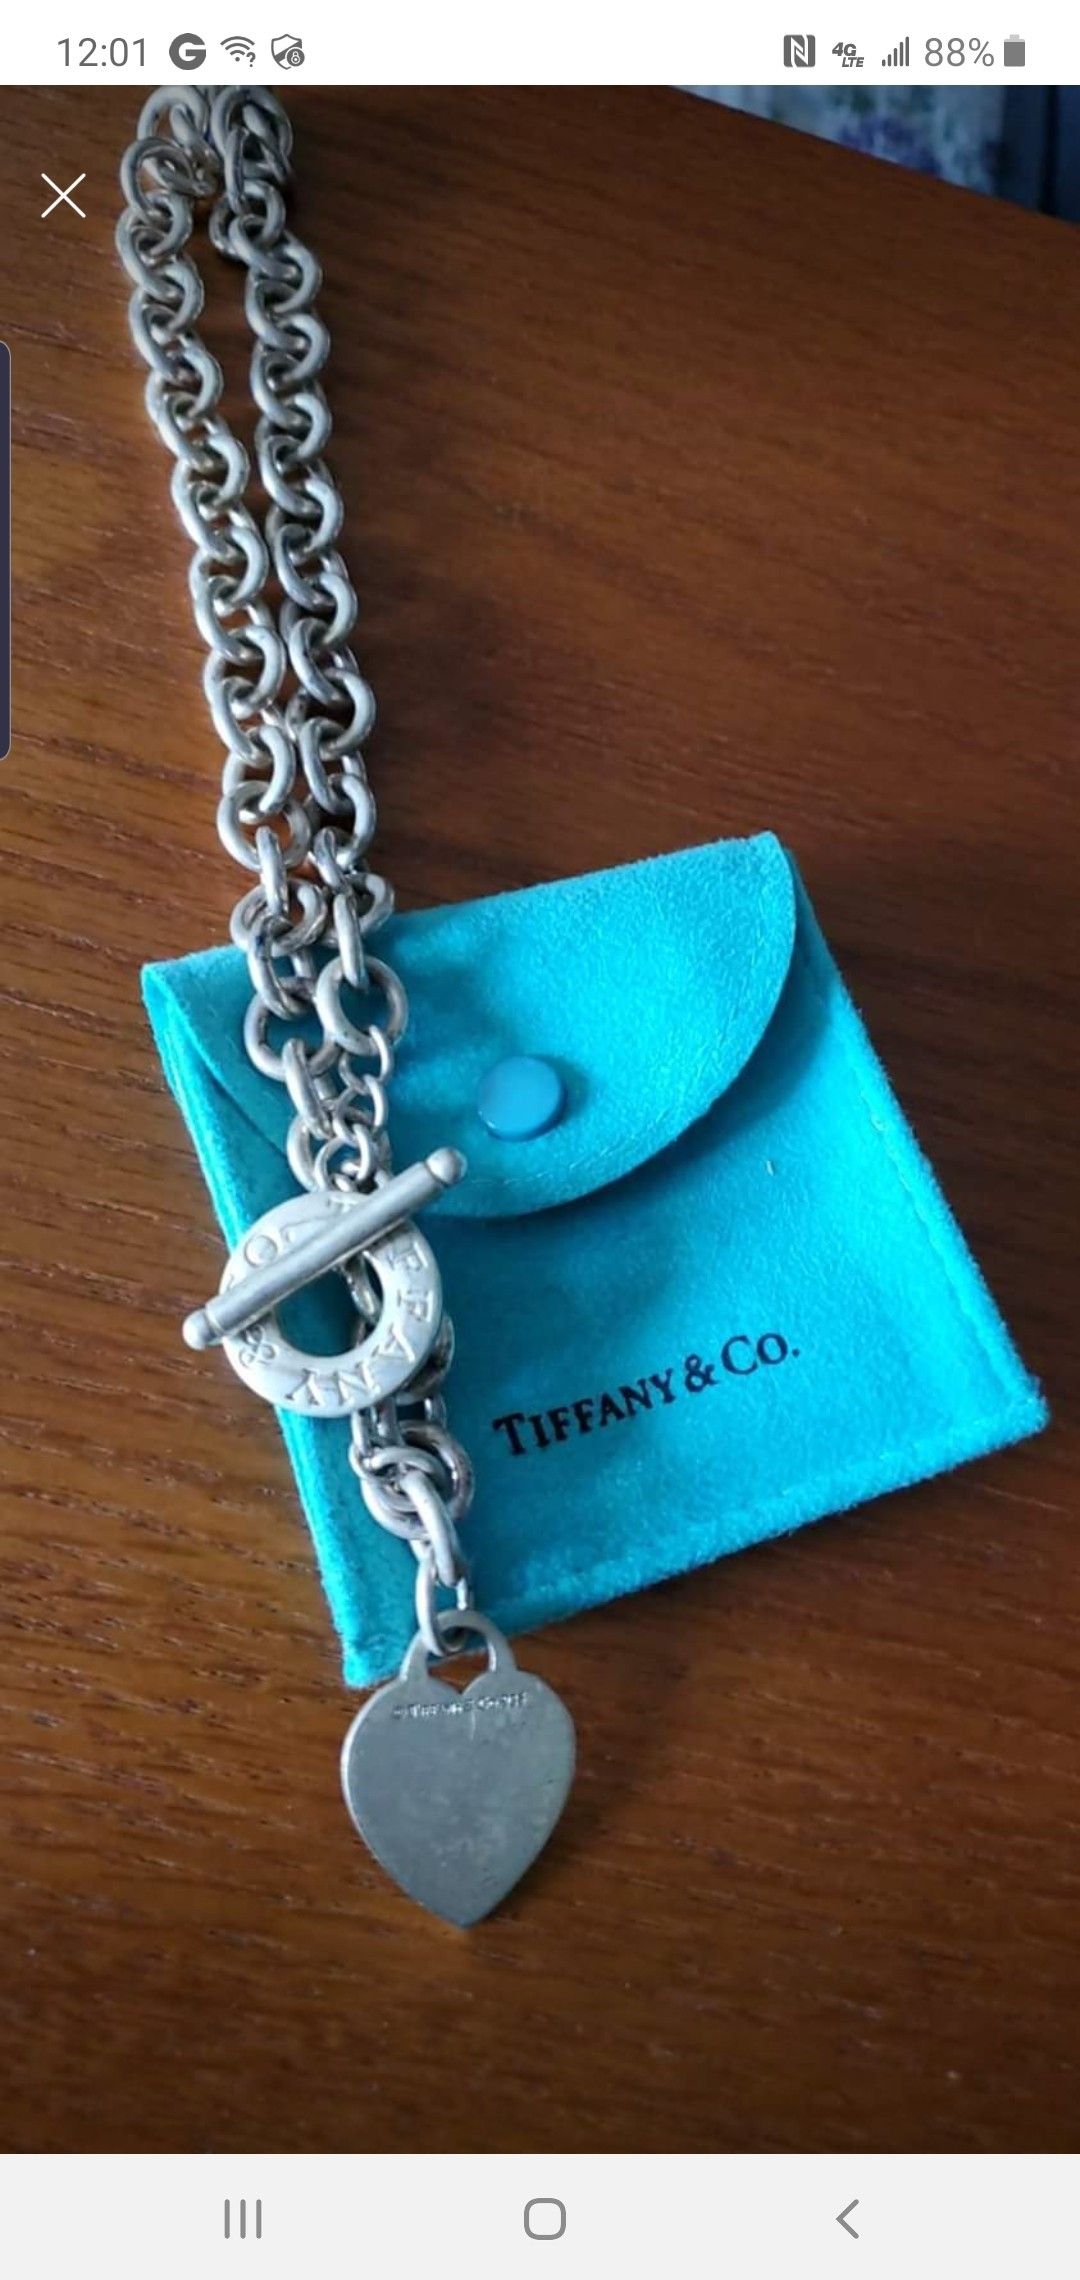 Tiffany's sterling silver heart chain necklace